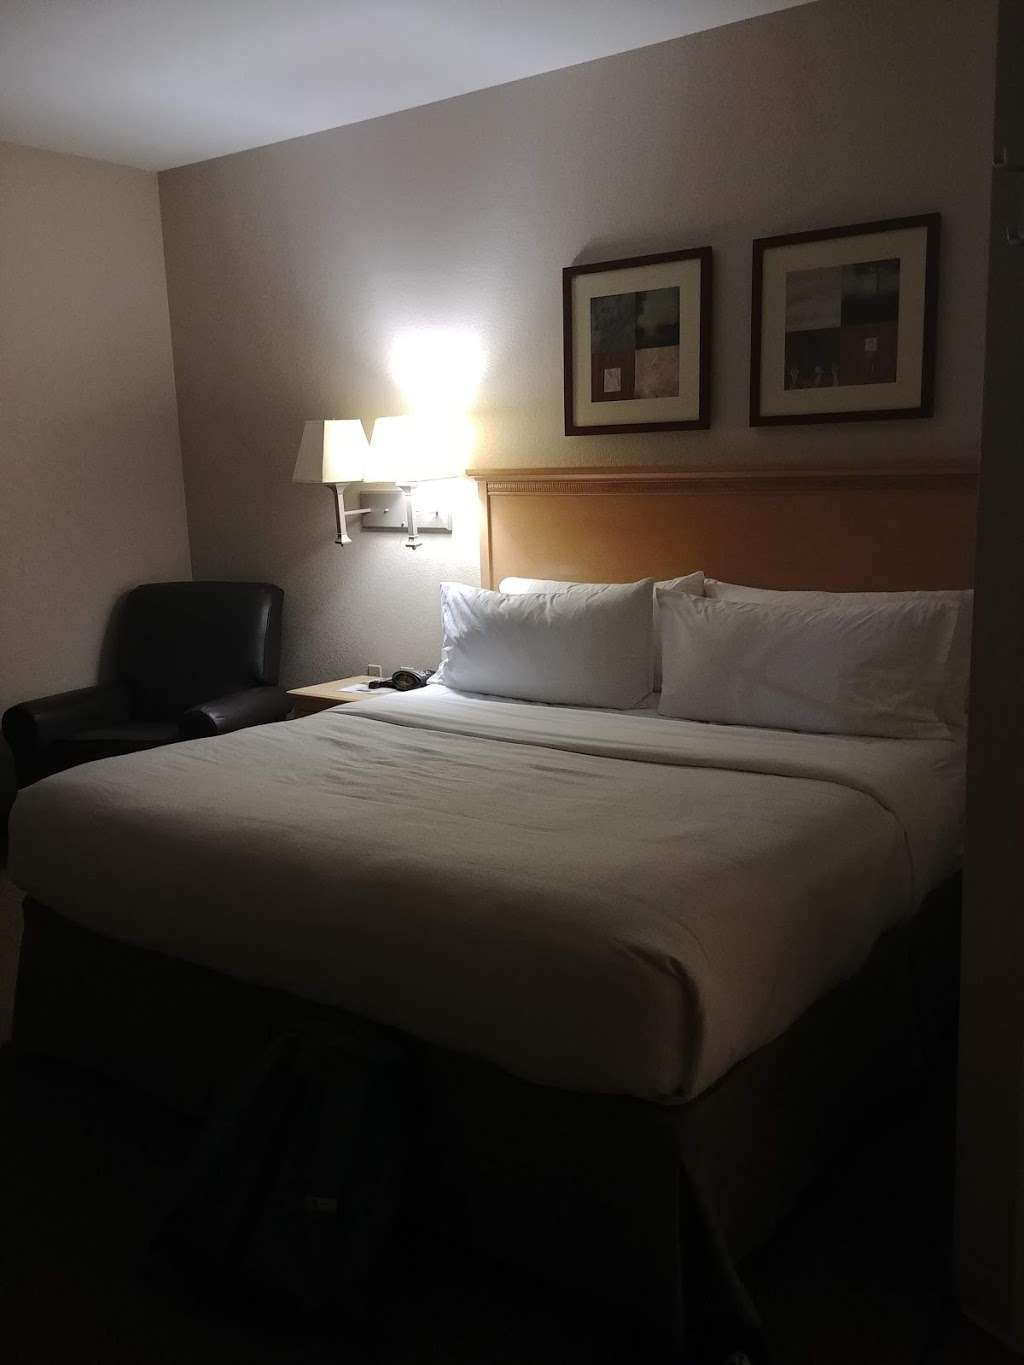 Candlewood Suites Houston (The Woodlands) | 17525 St Lukes Way, The Woodlands, TX 77384 | Phone: (936) 271-2100